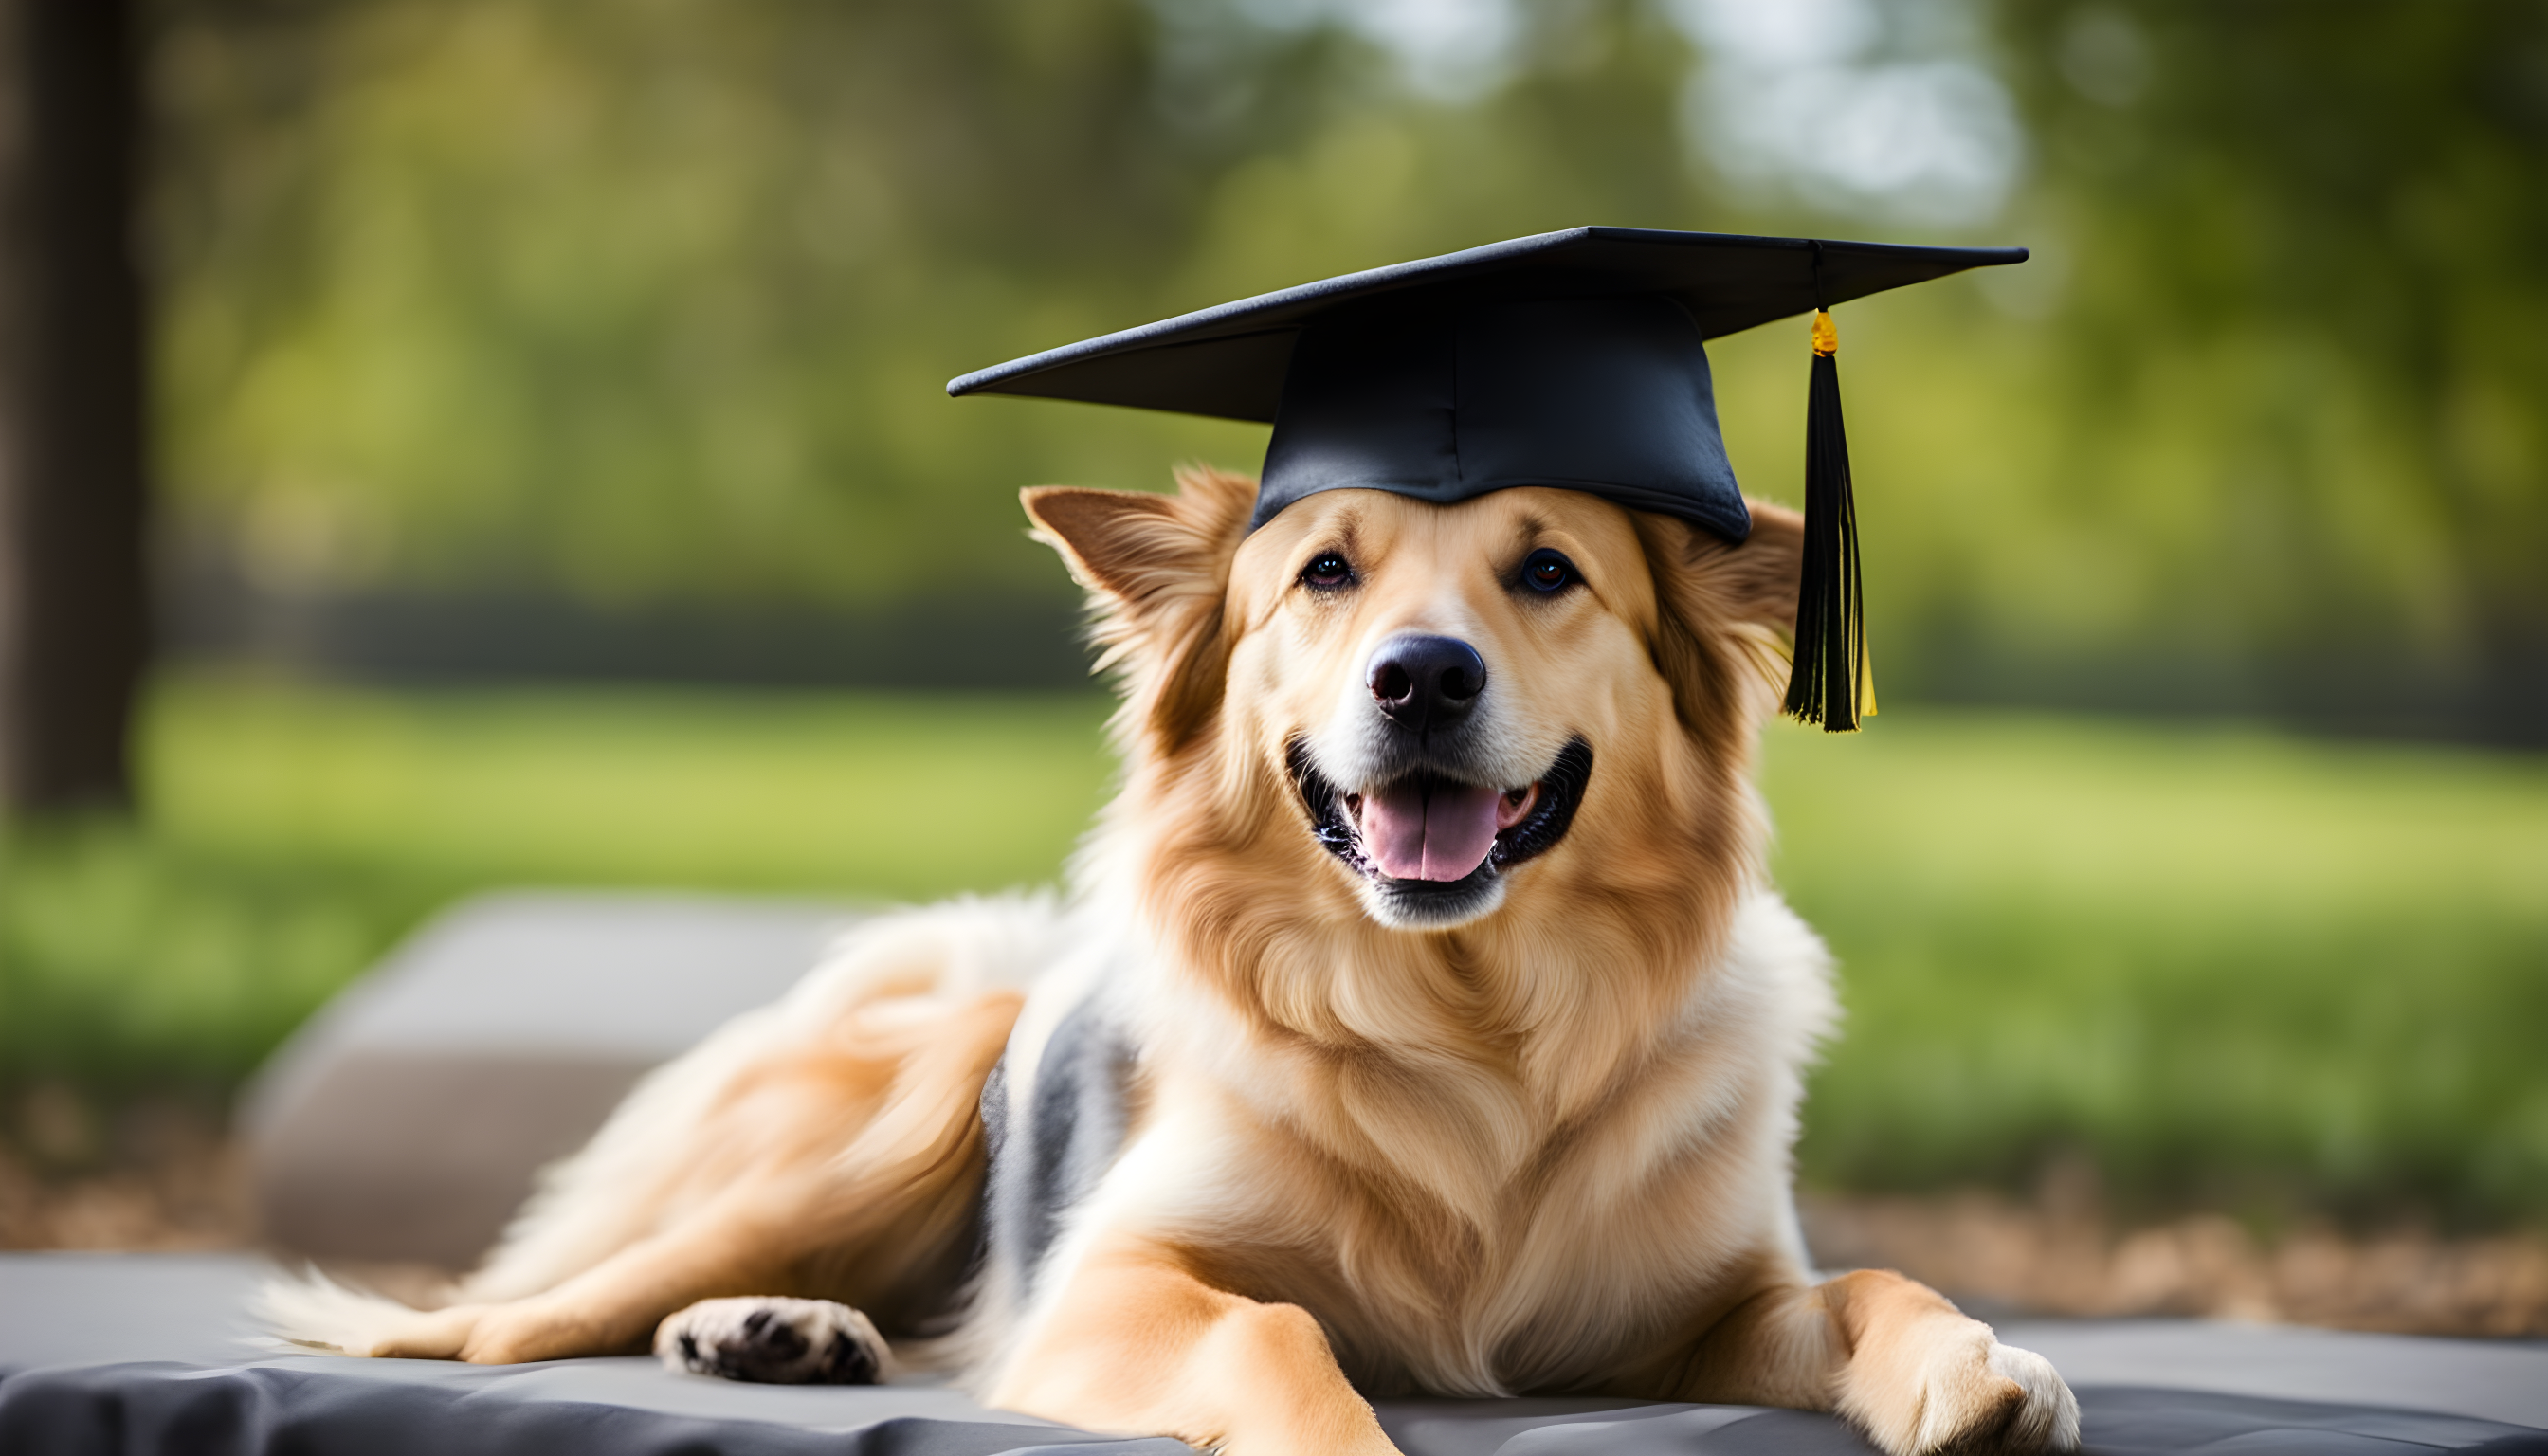 "A smiling Sheprador with a graduation cap, symbolizing you've learned all you need about the breed."